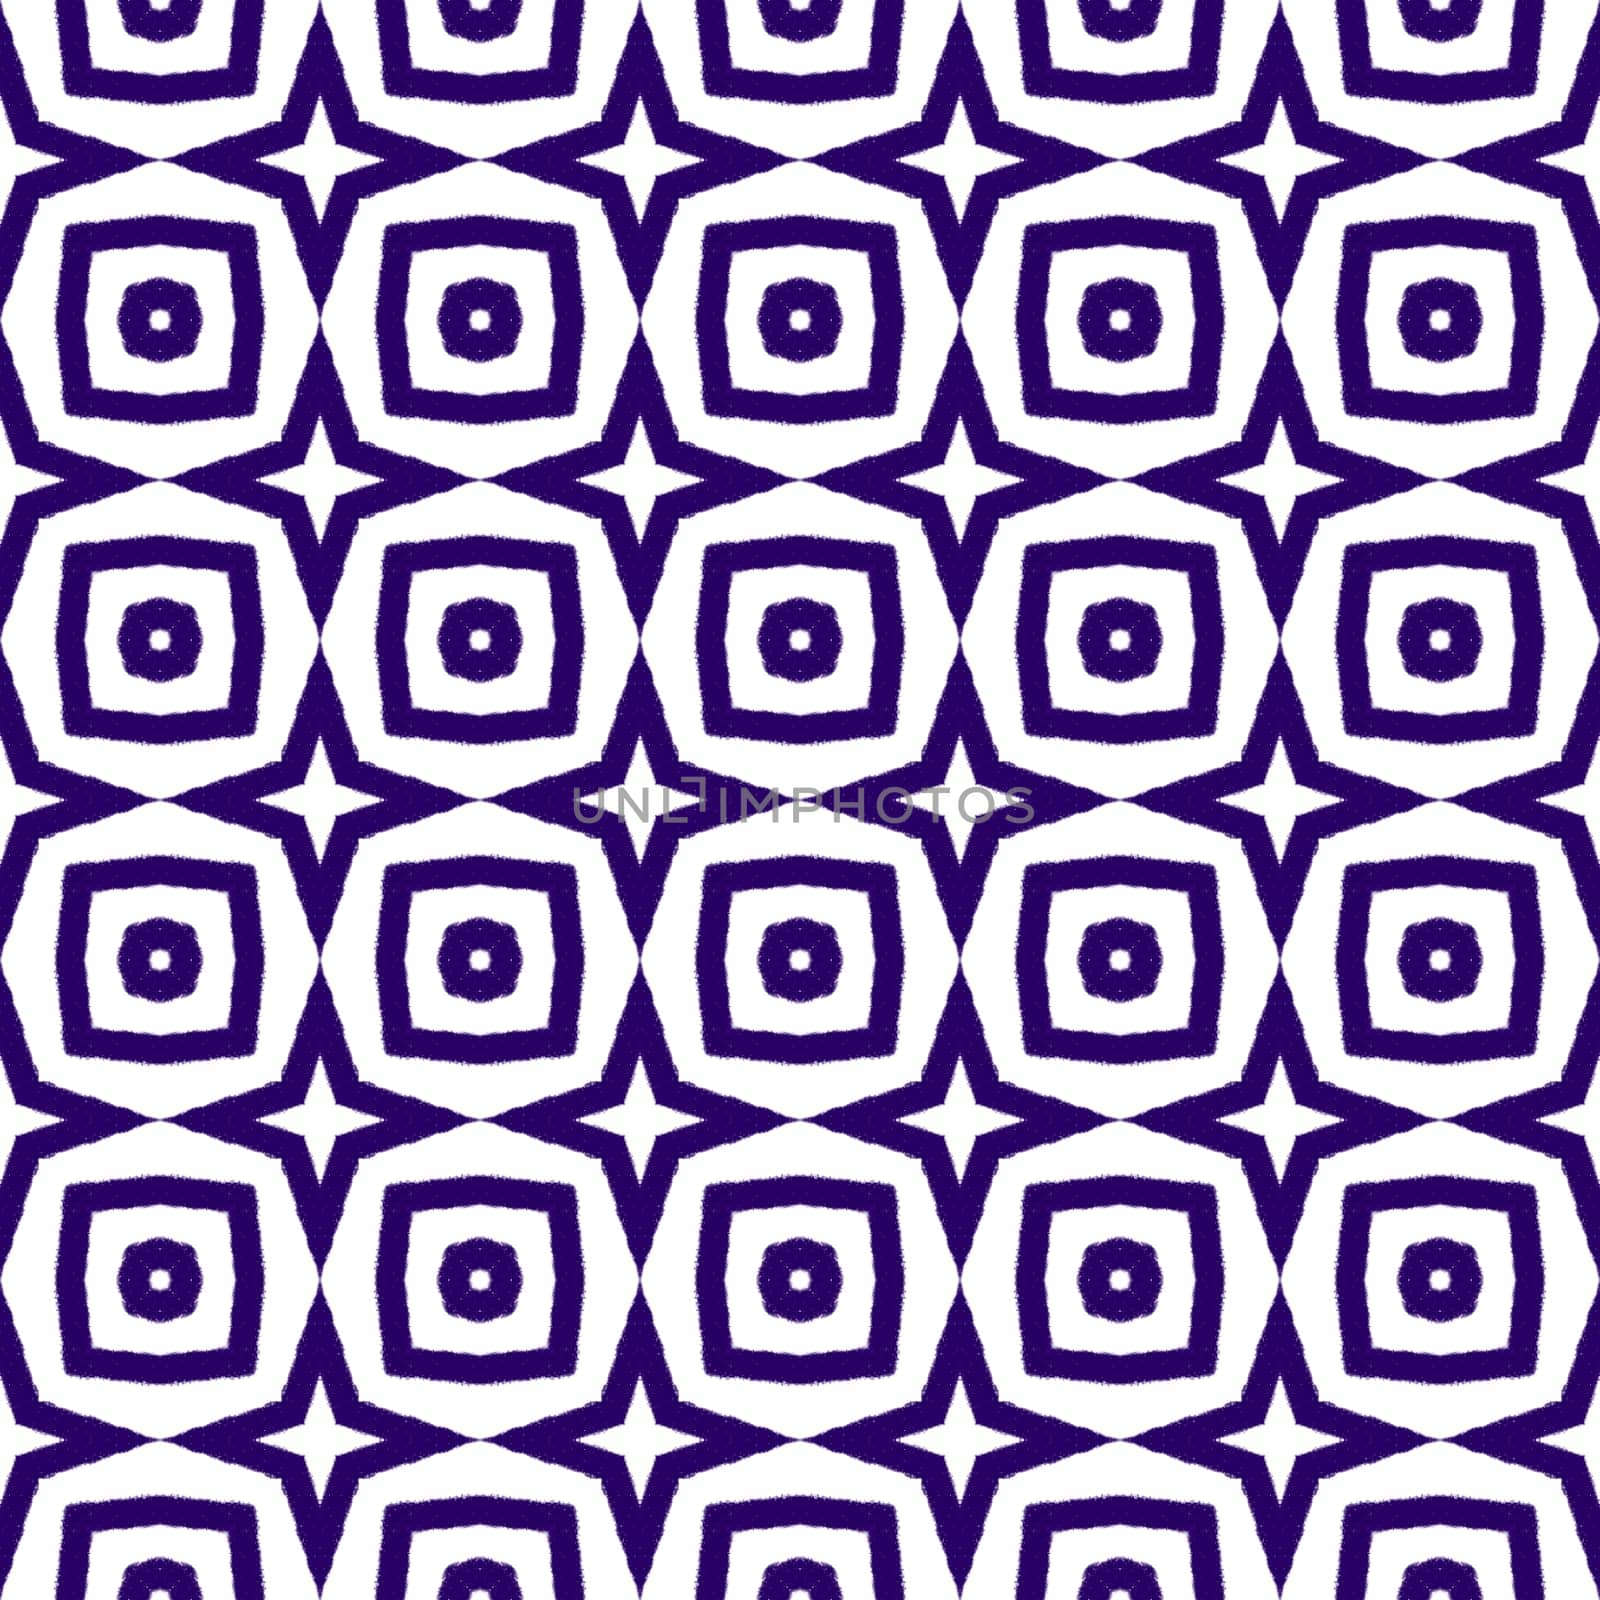 Ethnic hand painted pattern. Purple symmetrical kaleidoscope background. Summer dress ethnic hand painted tile. Textile ready beauteous print, swimwear fabric, wallpaper, wrapping.